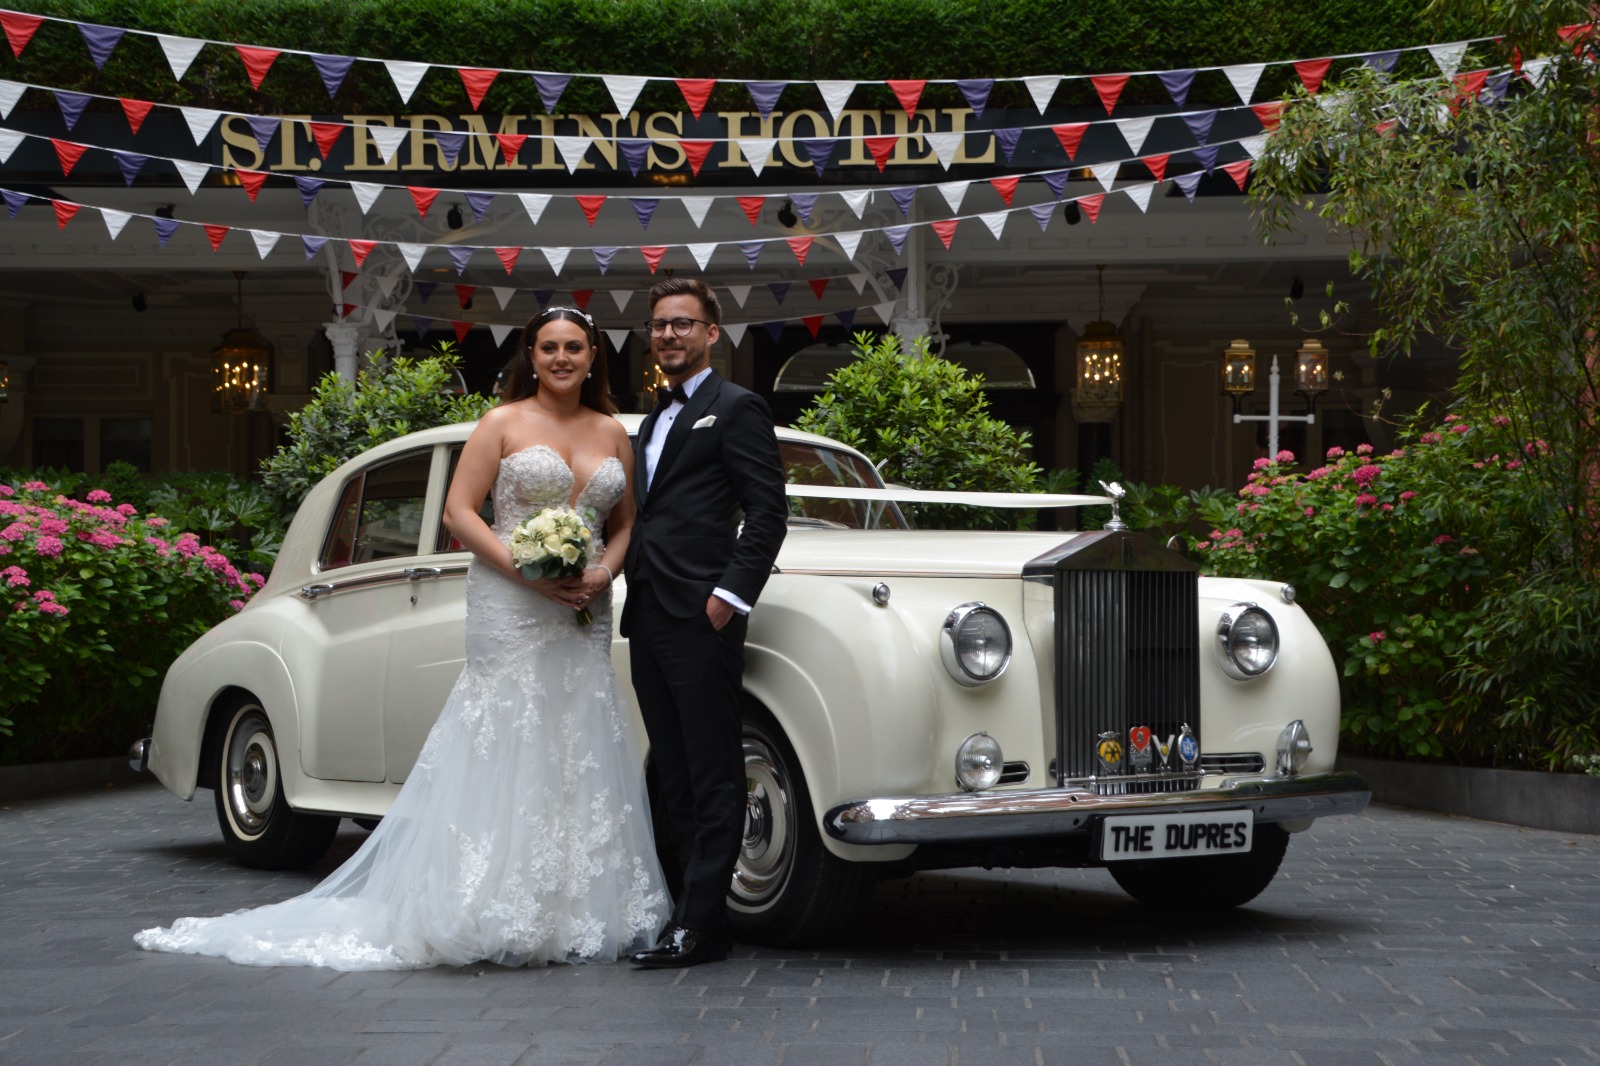 Wedding-cars-for-hire-WS1